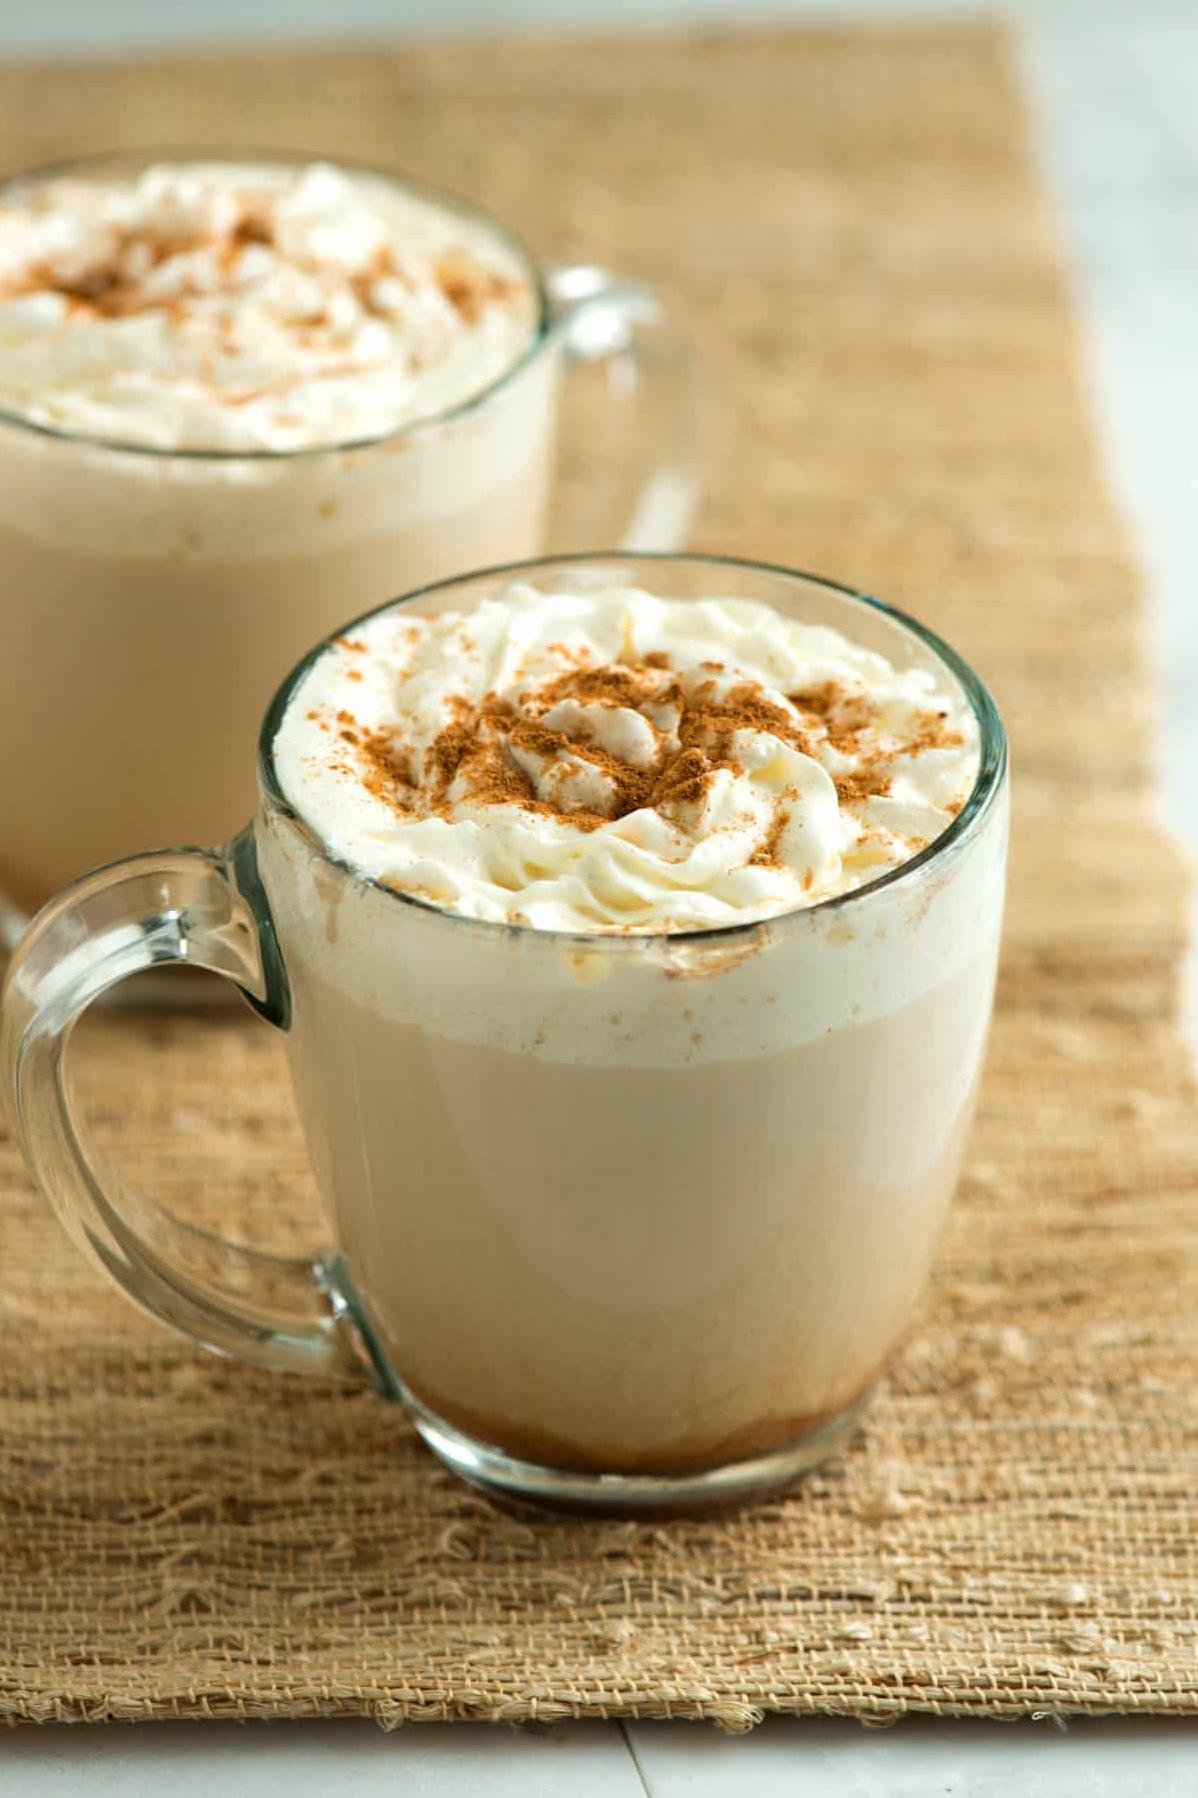  This latte is like a warm hug on a chilly day.